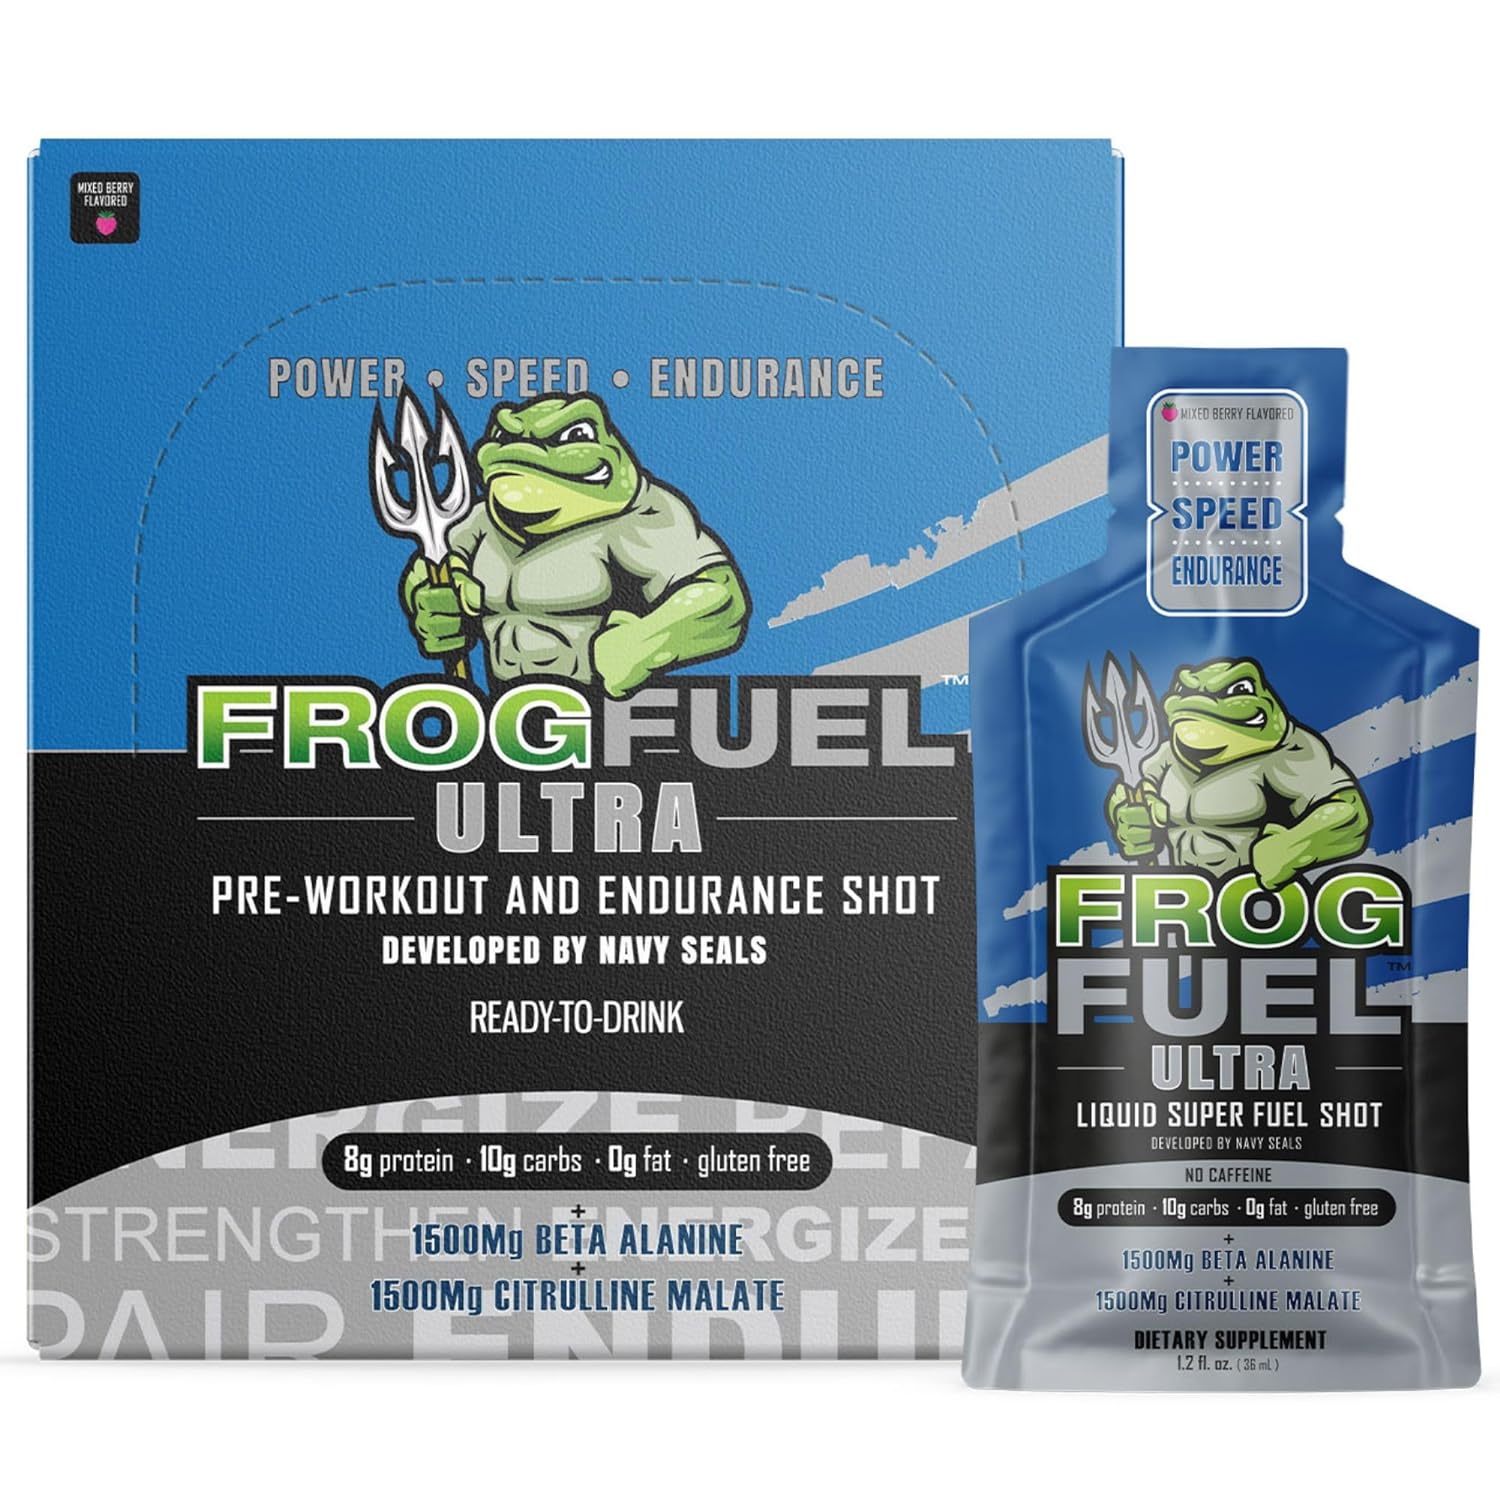 Frog Fuel Ultra Pre Workout Shot with 1500mg Beta Alanine, Electrolyte